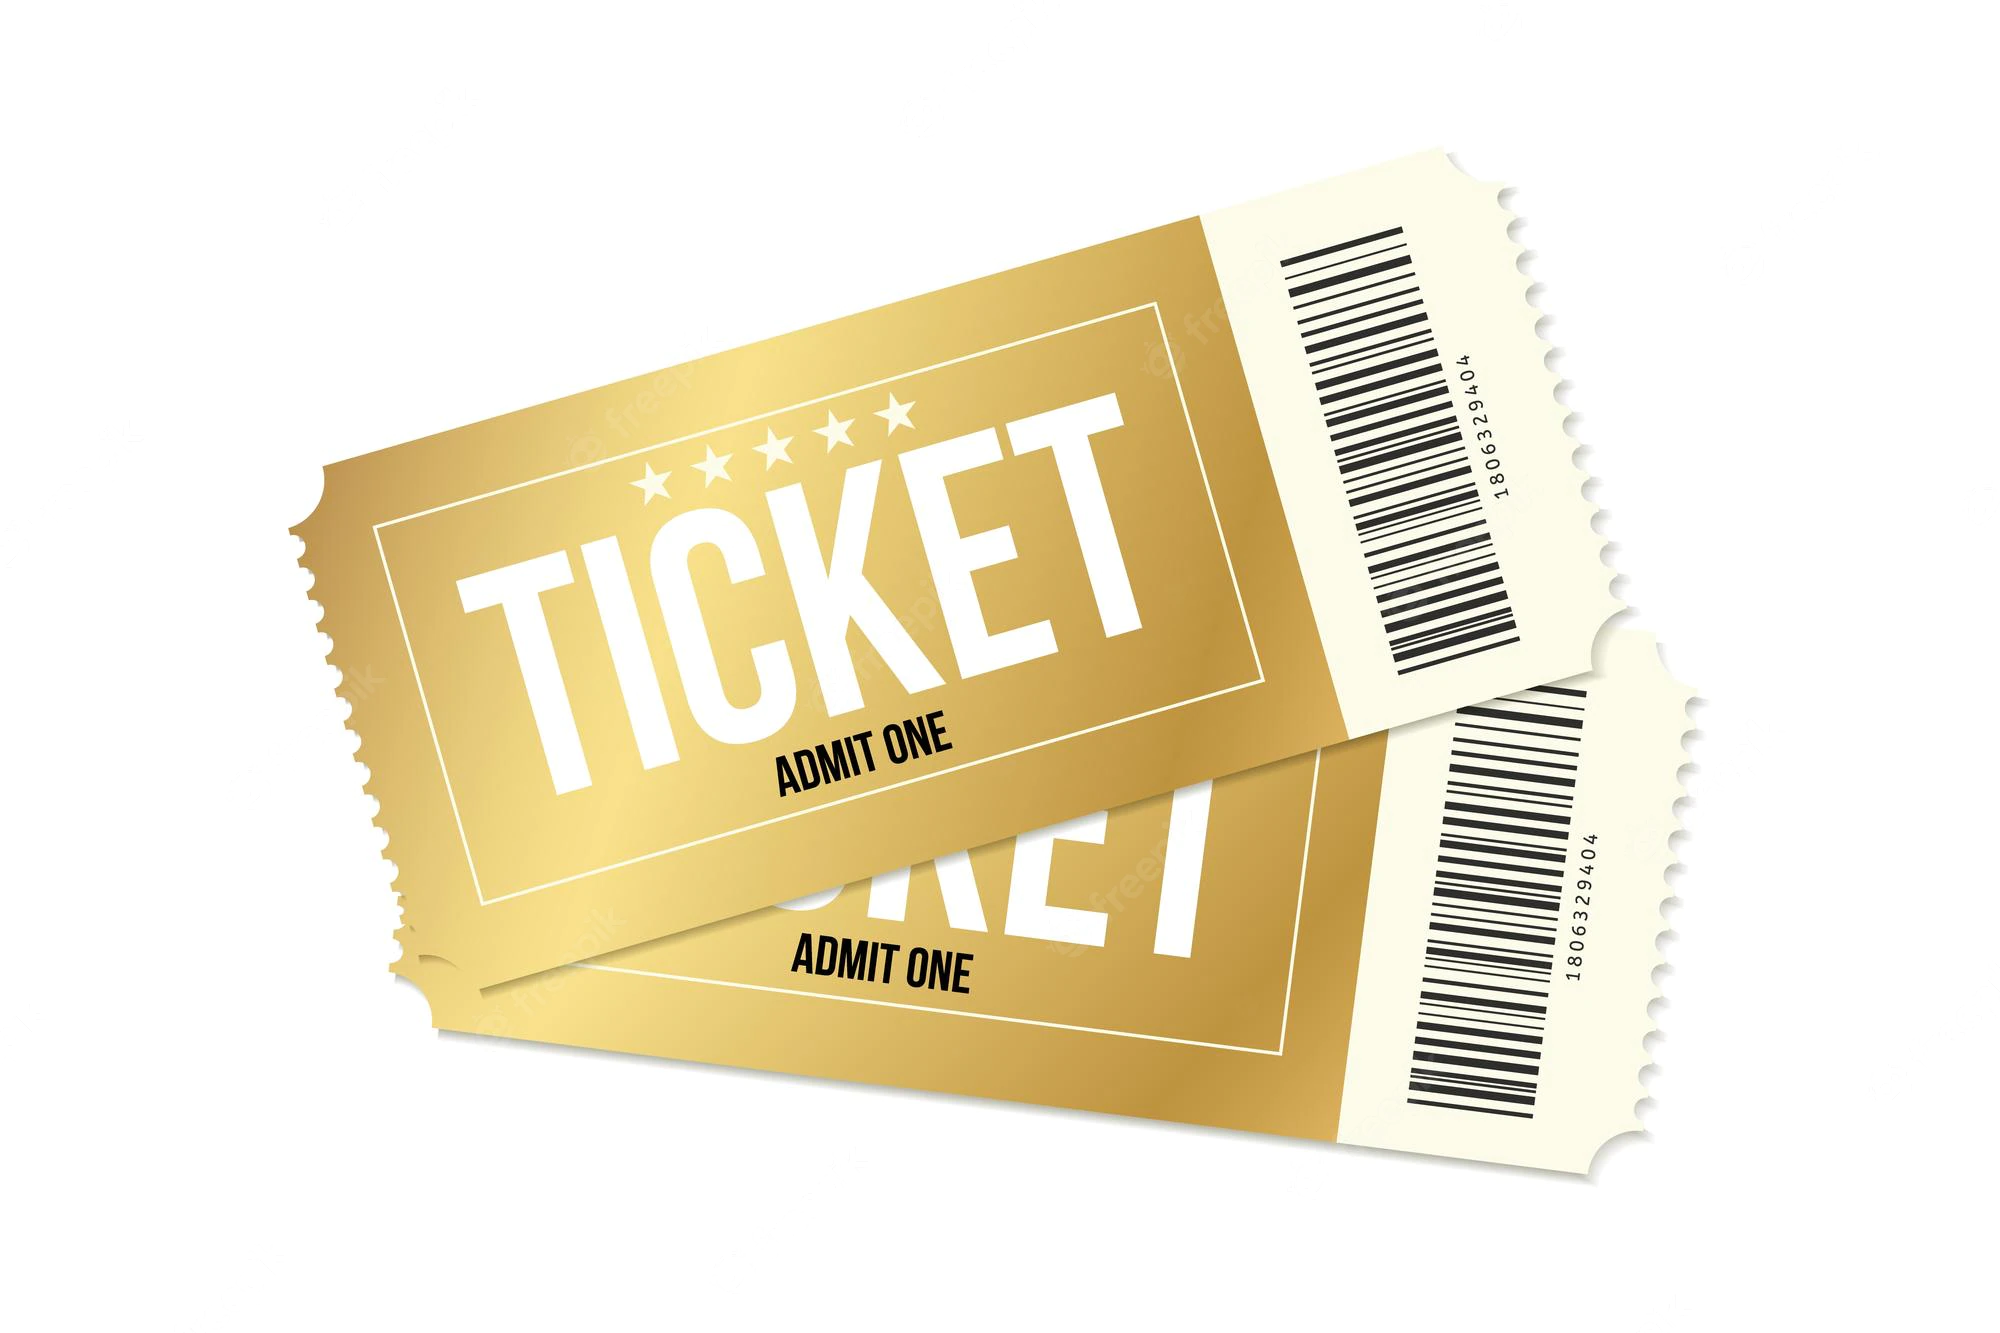 Golden tickets for the show!